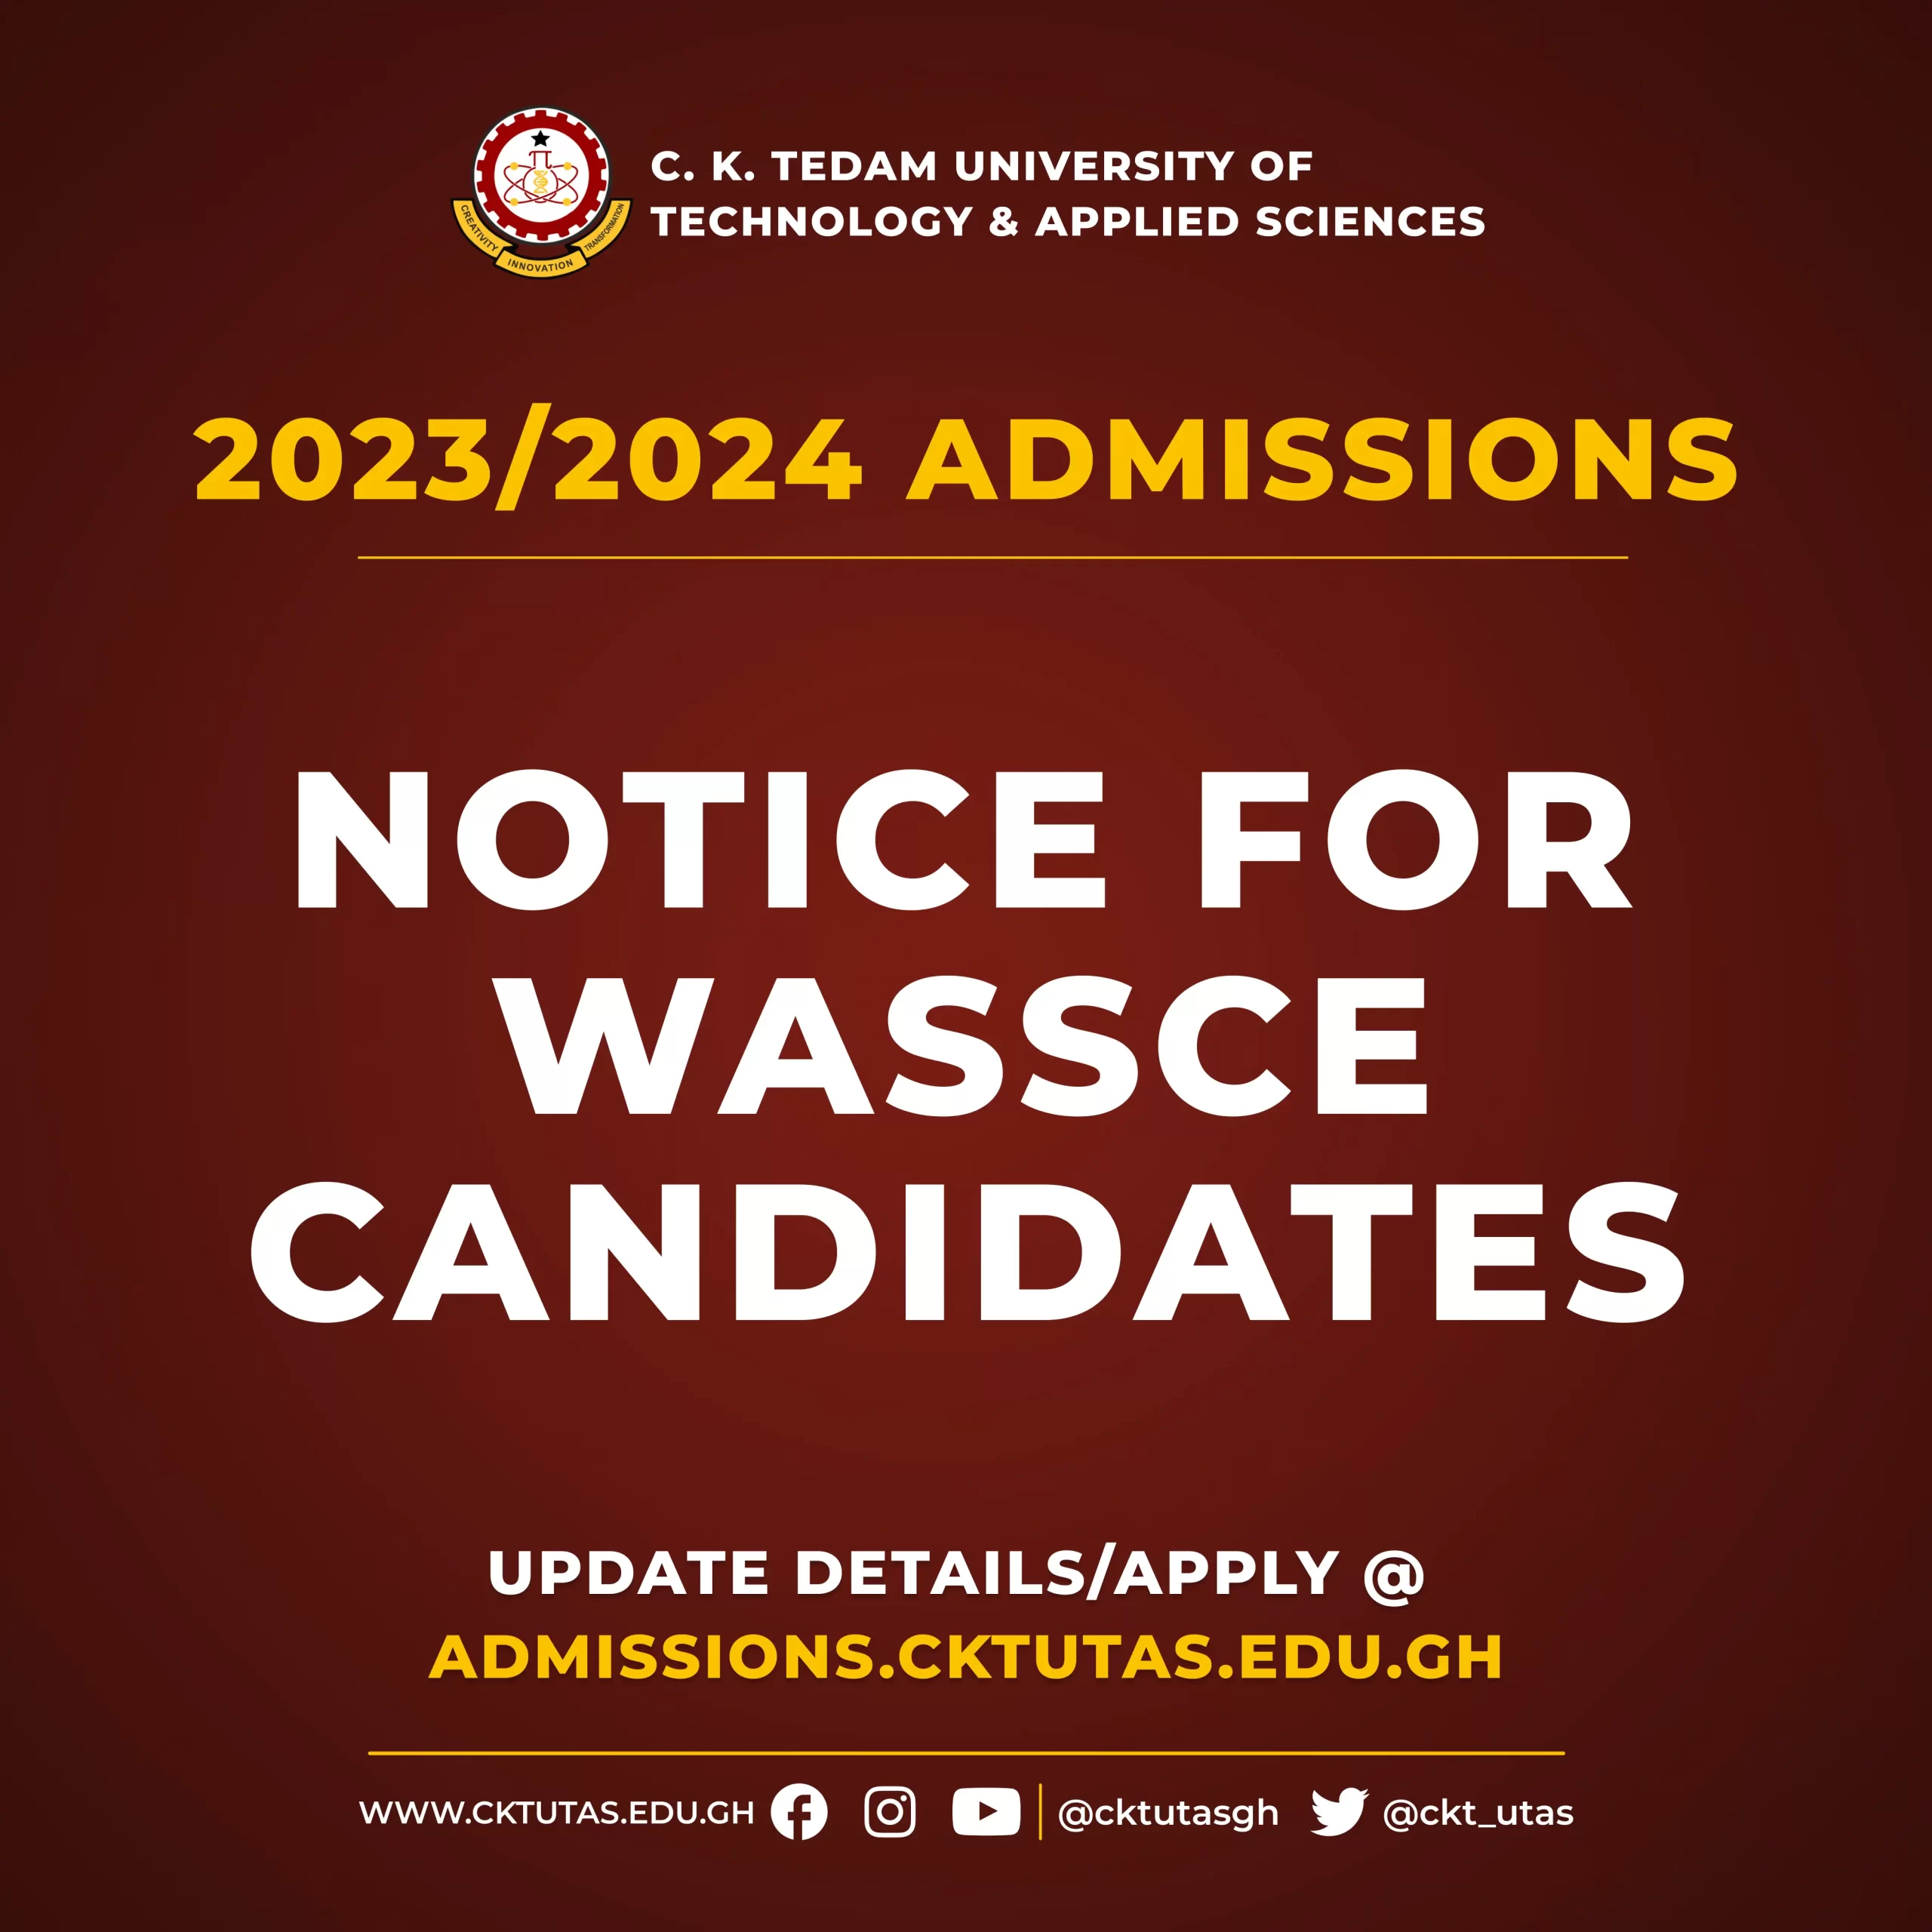 NOTICE FOR WASSCE CANDIDATES